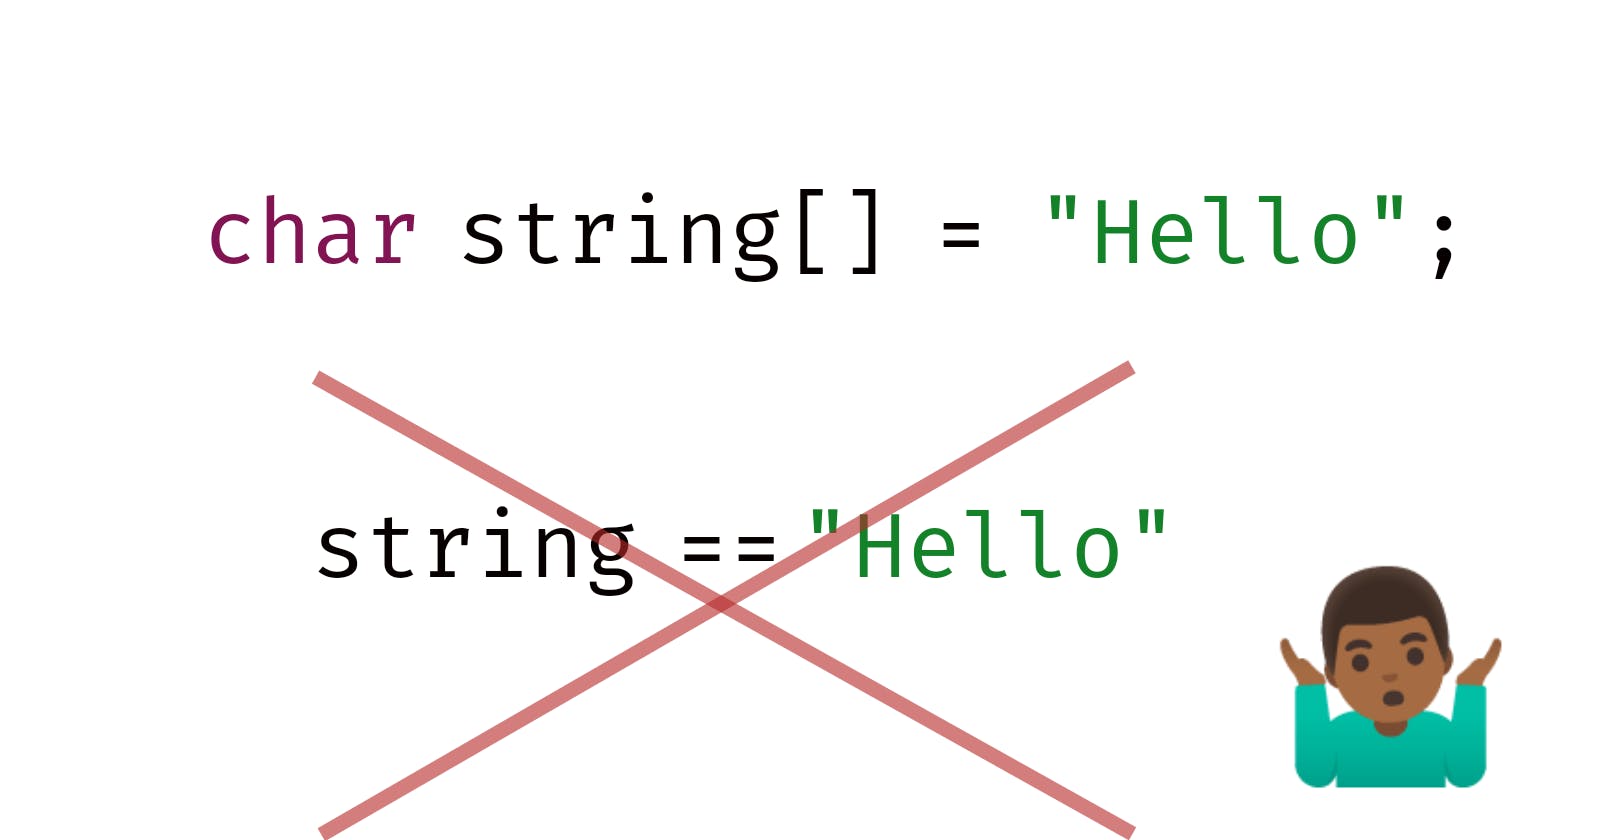 Why == doesn't work on strings in C